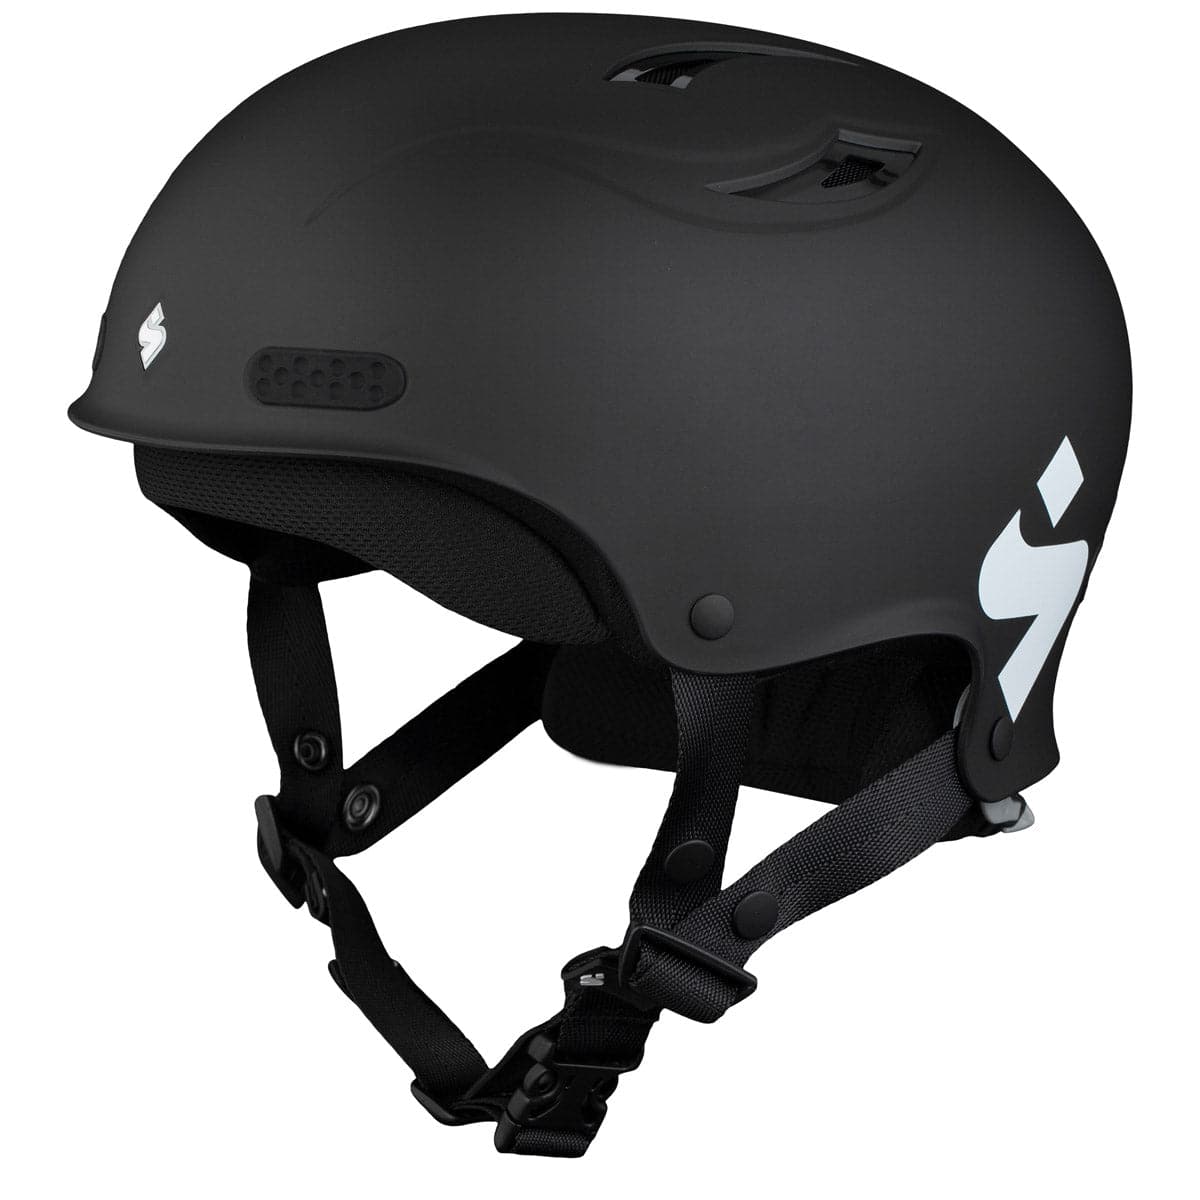 Featuring the Wanderer II Helmet helmet manufactured by Sweet shown here from a second angle.